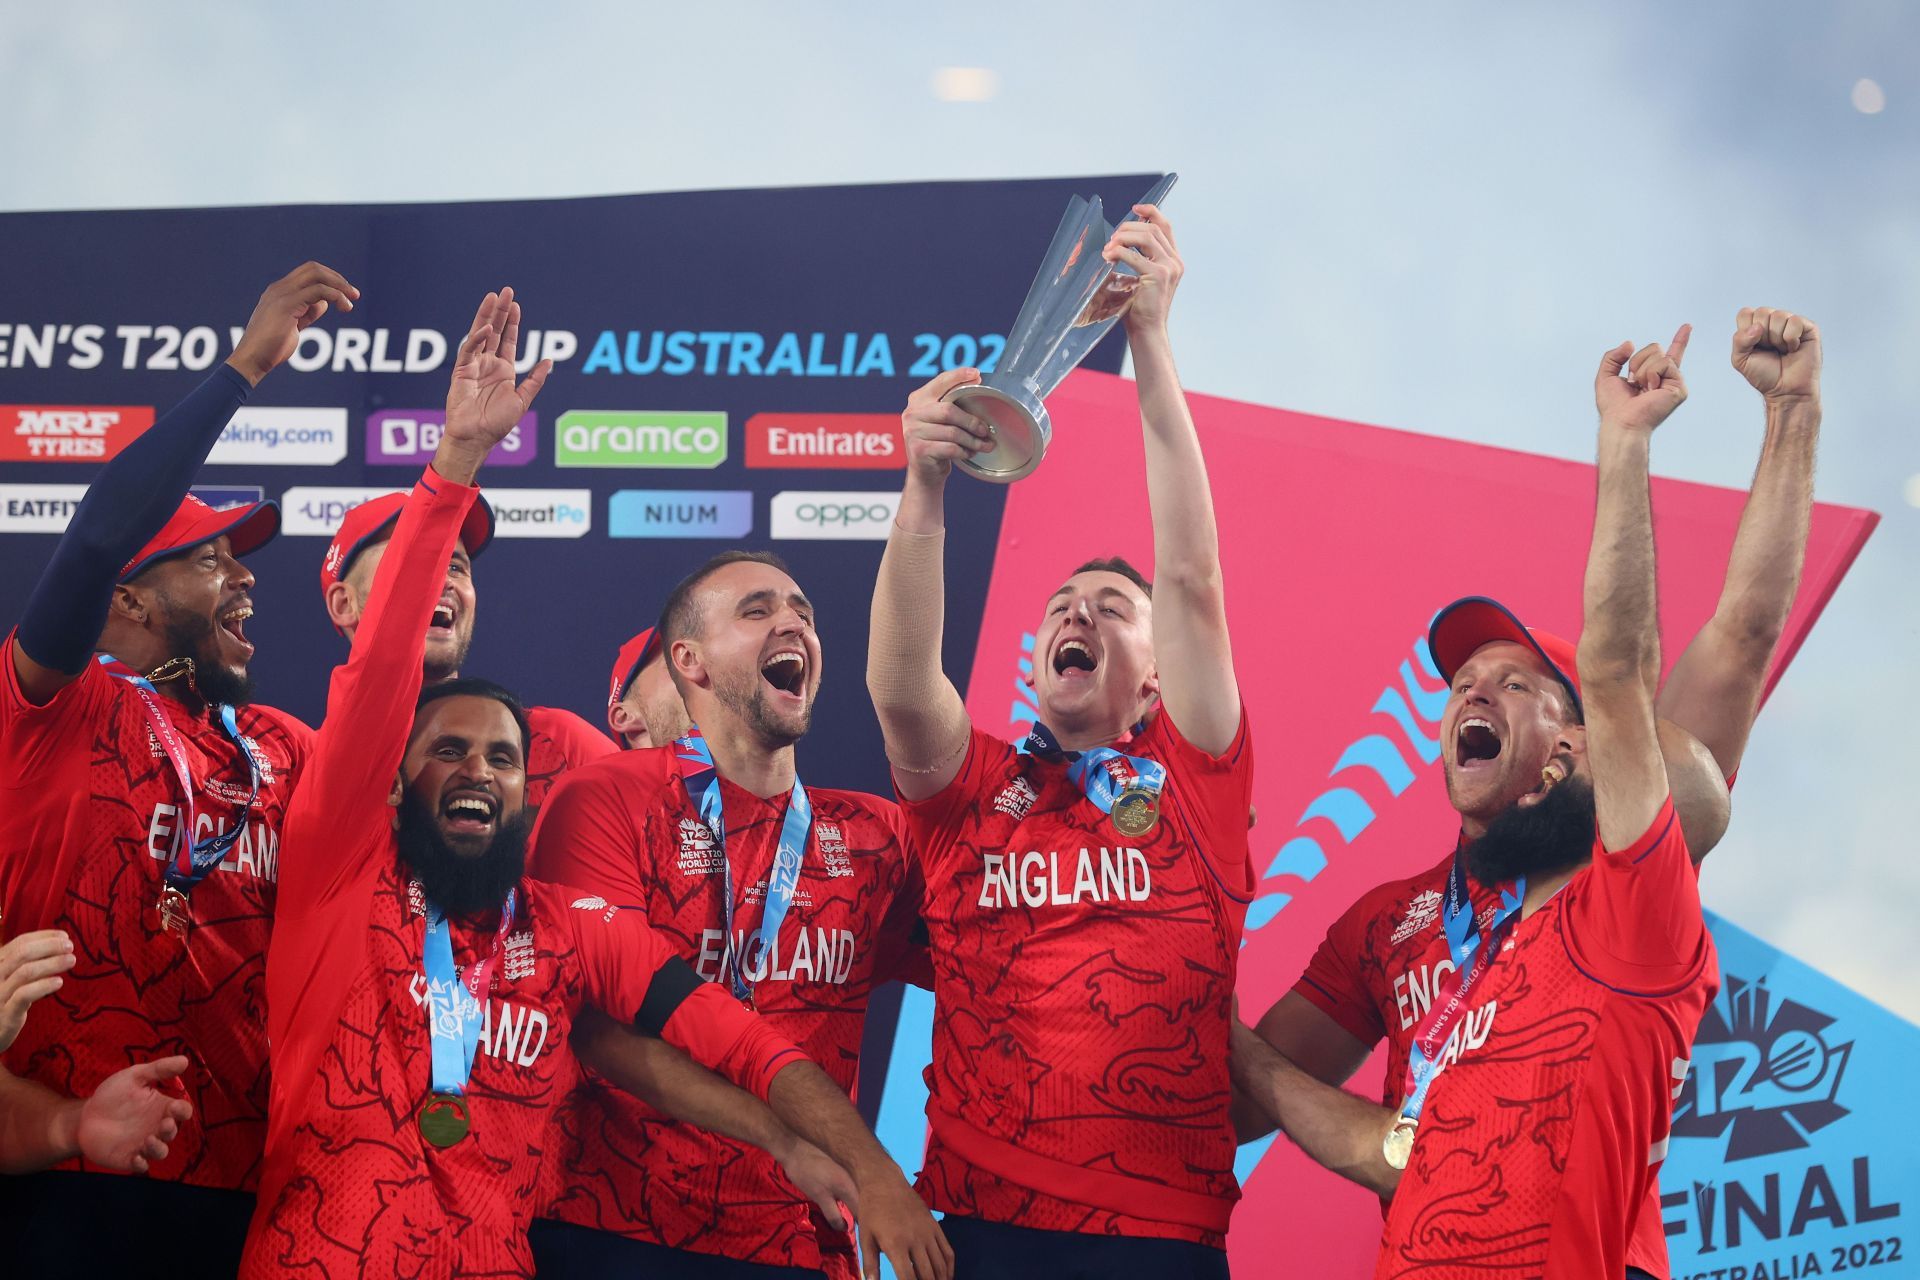 England celebrate their T20 World Cup victory. (Credits: Getty)